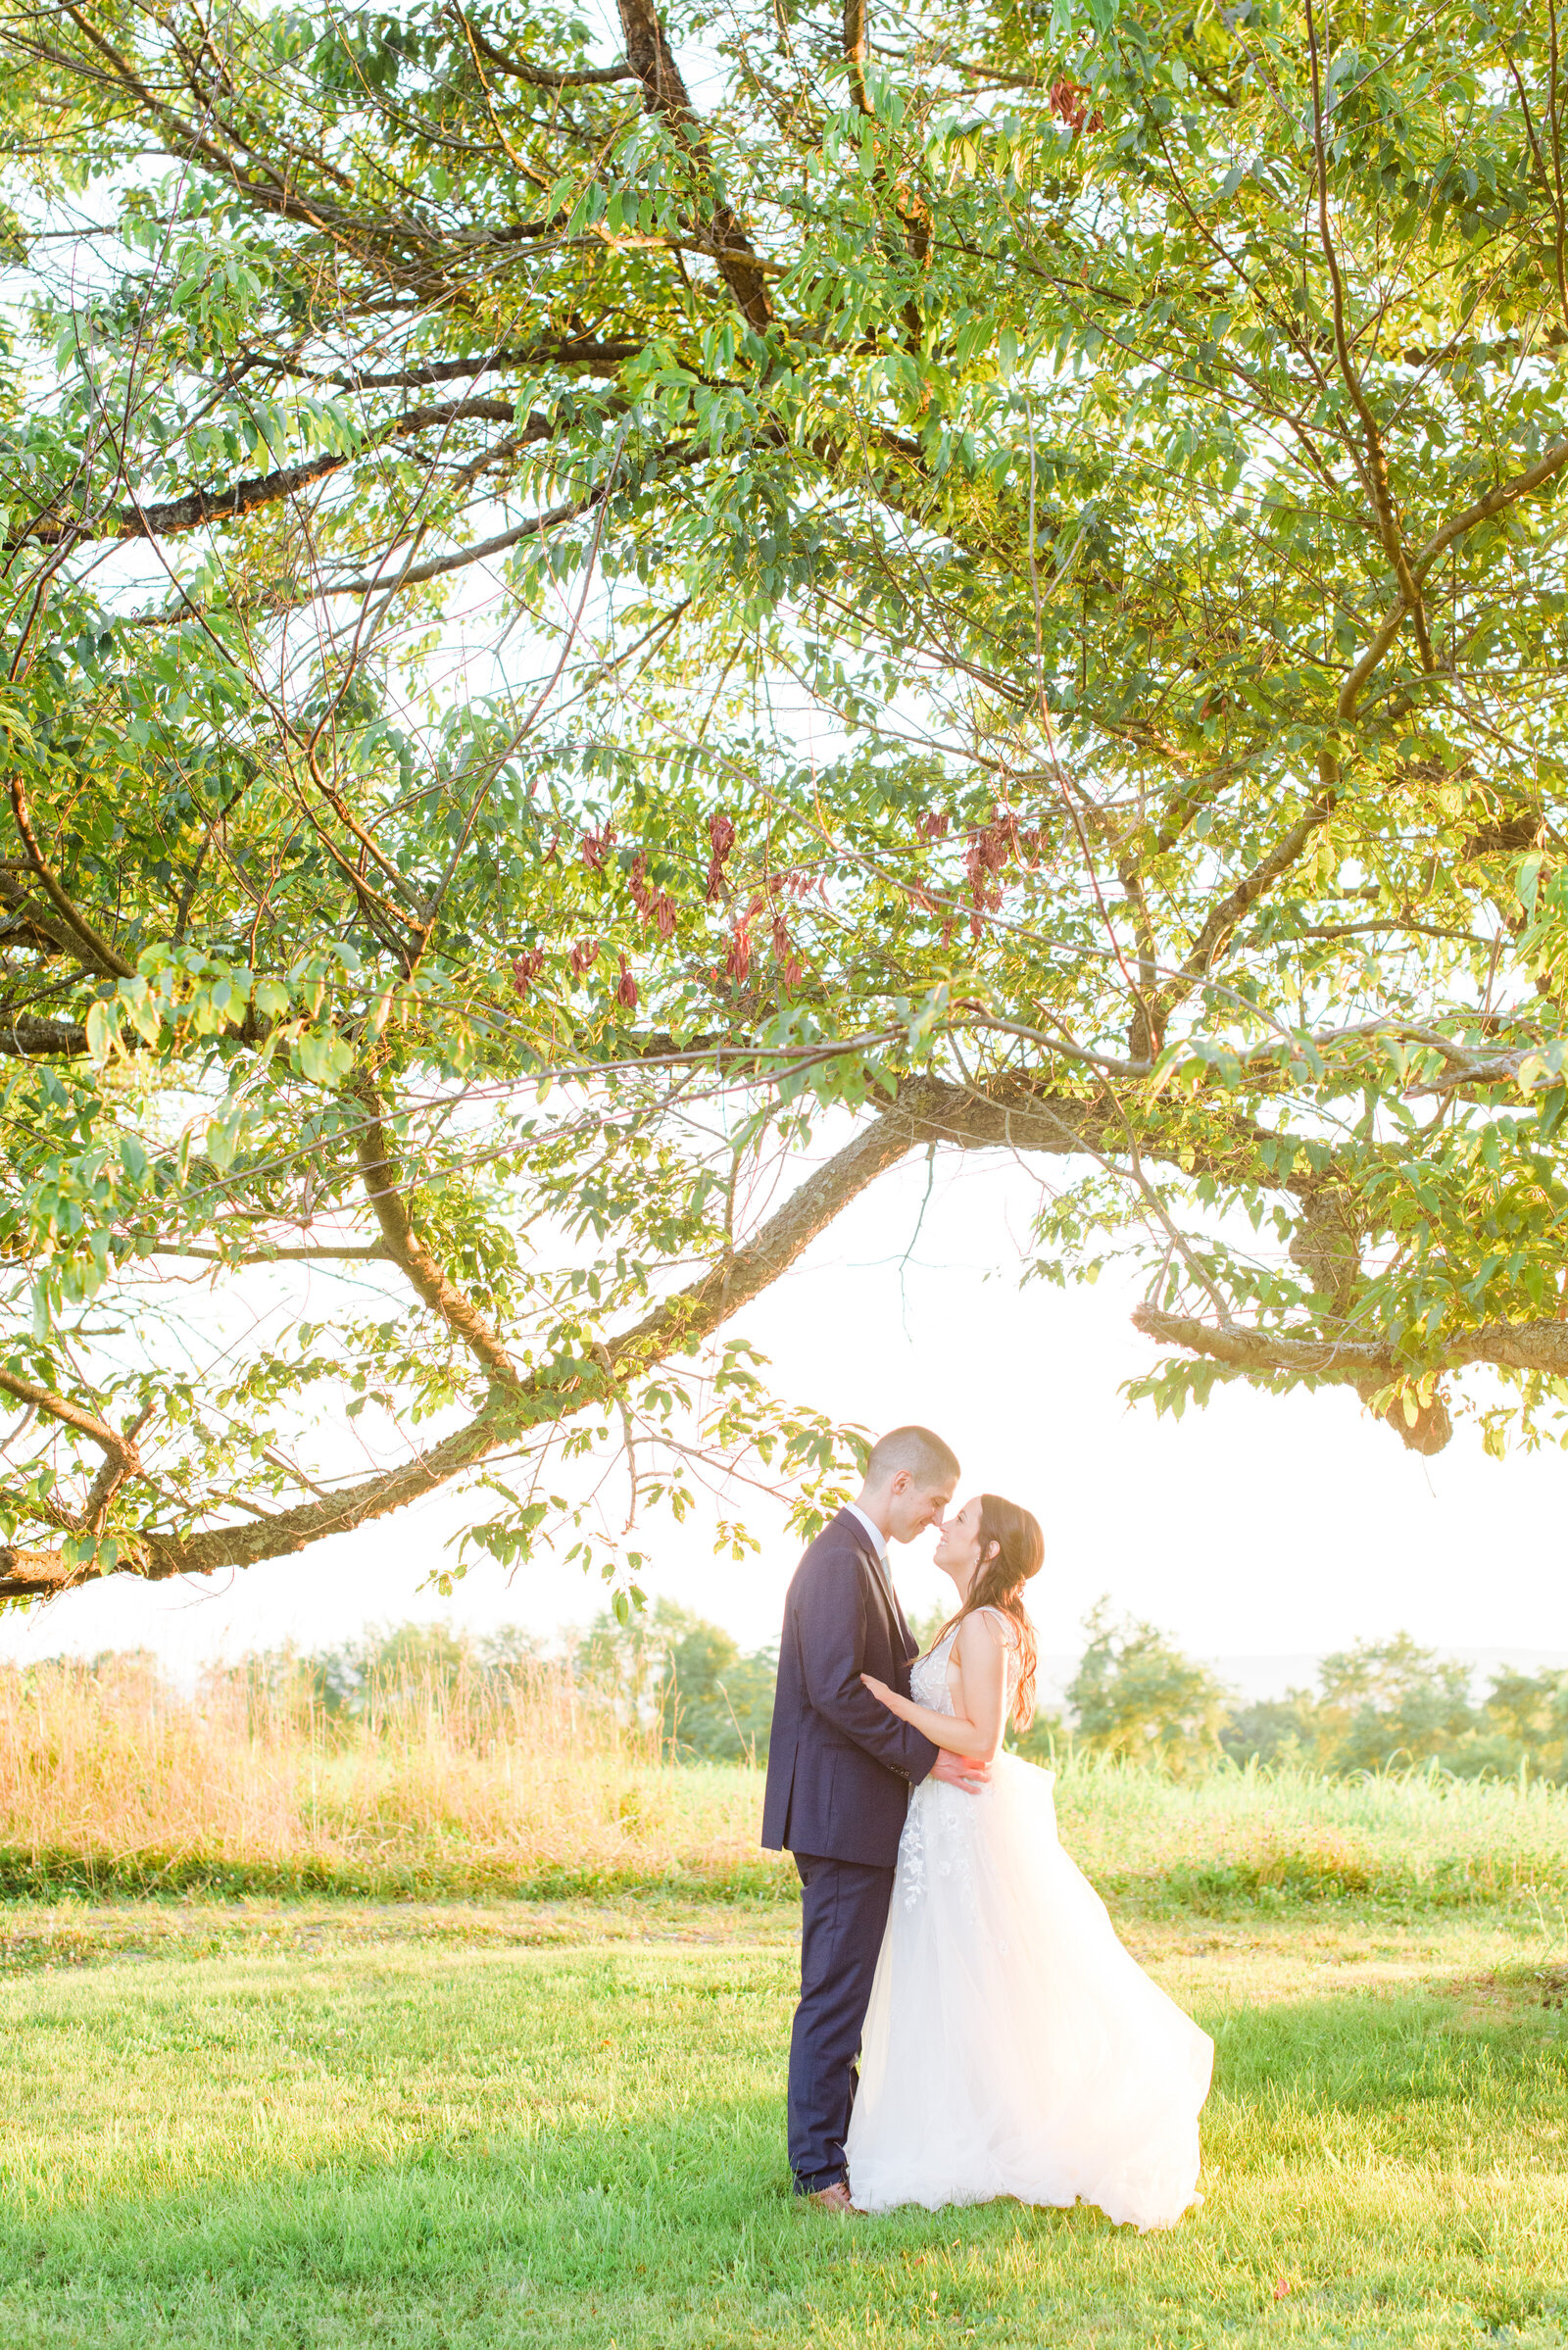 Couple embraces and smiles at sunset on their wedding day photographed by Cait Kramer Photography